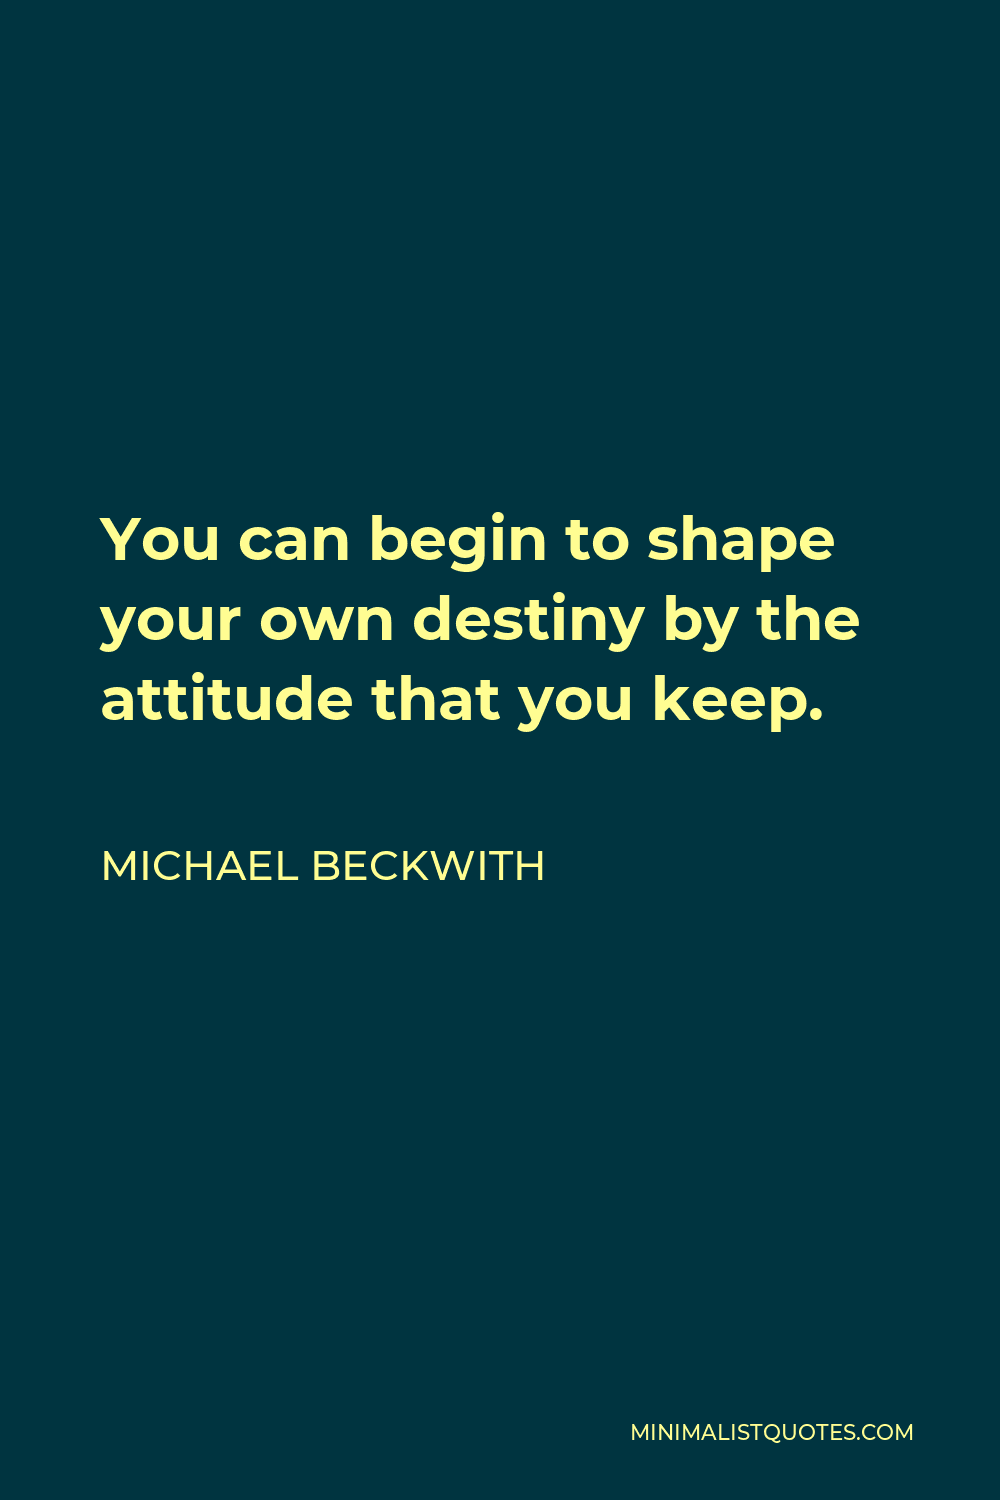 Michael Beckwith Quote - You can begin to shape your own destiny by the attitude that you keep.